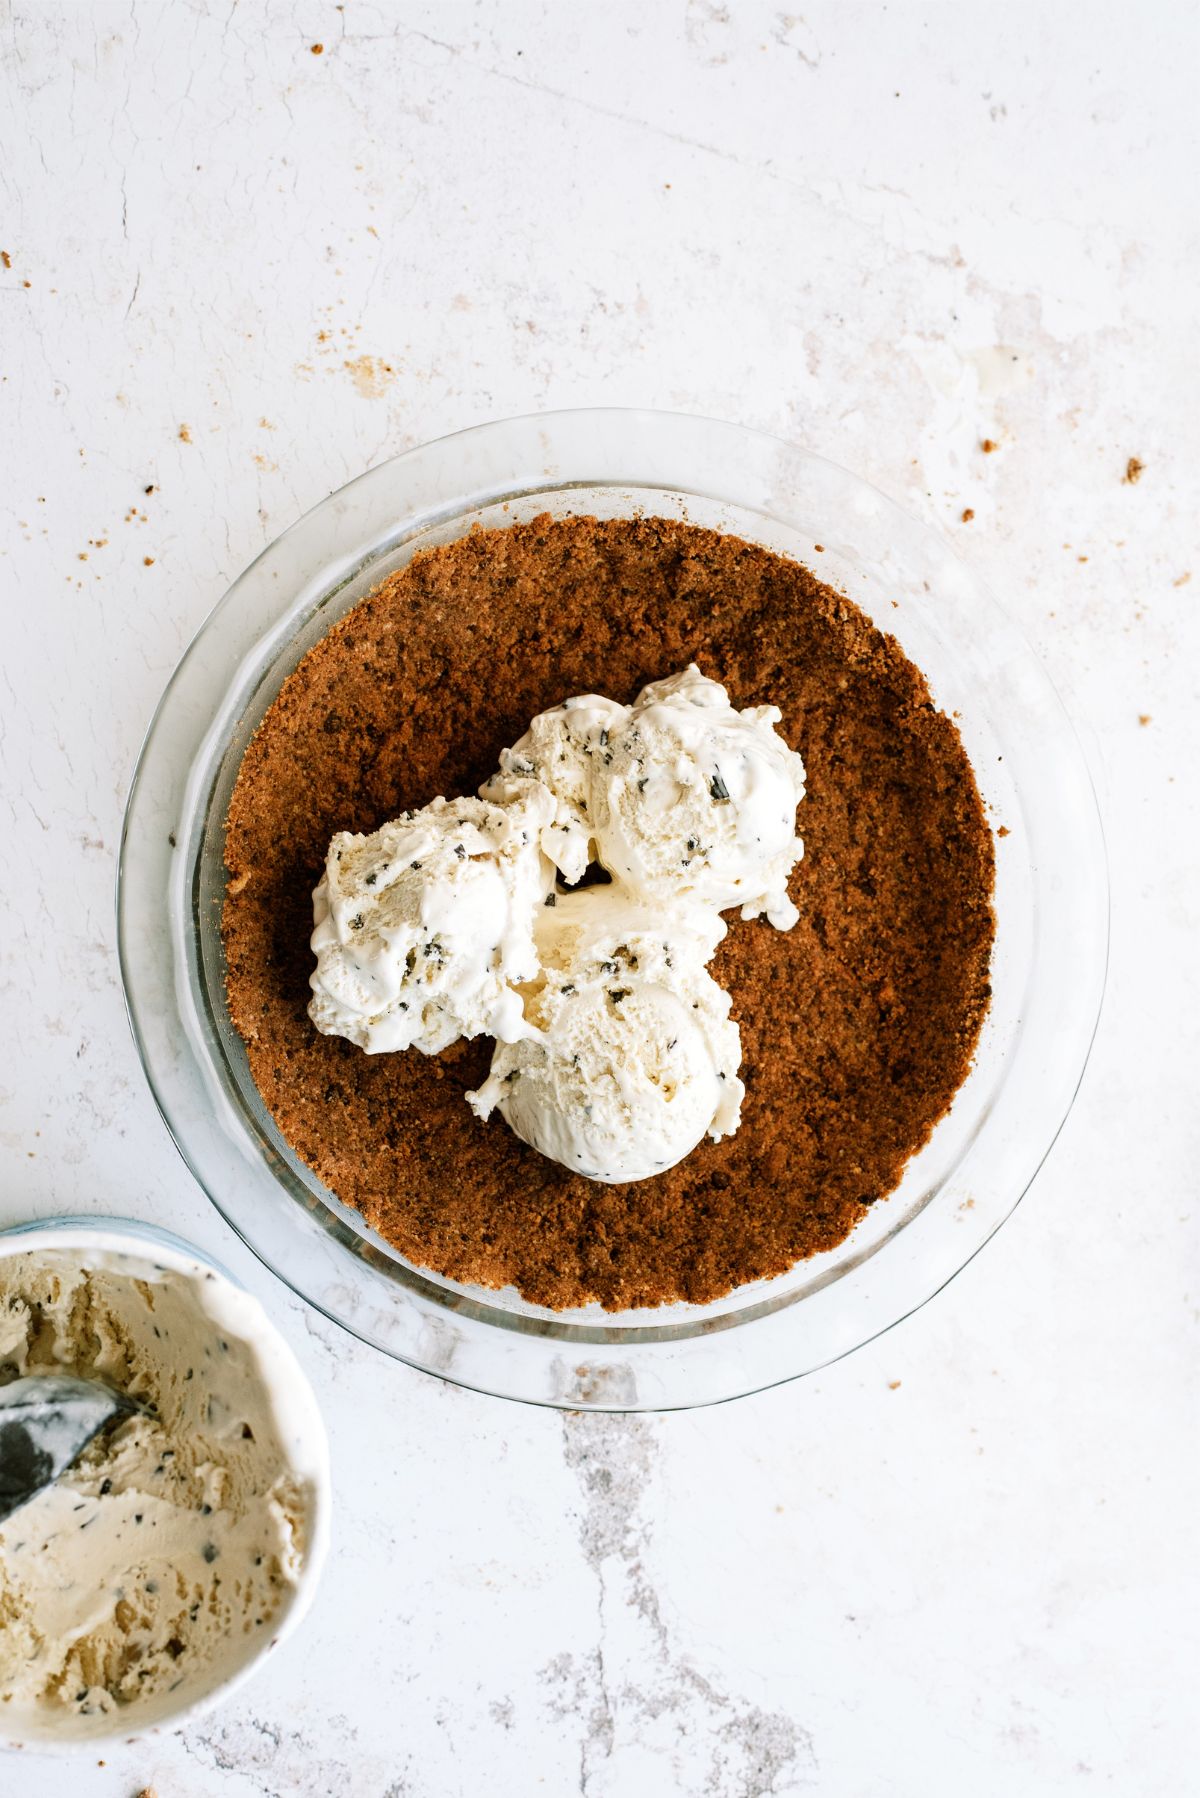 Scoops of Ice Cream on top of the cookie pie crust